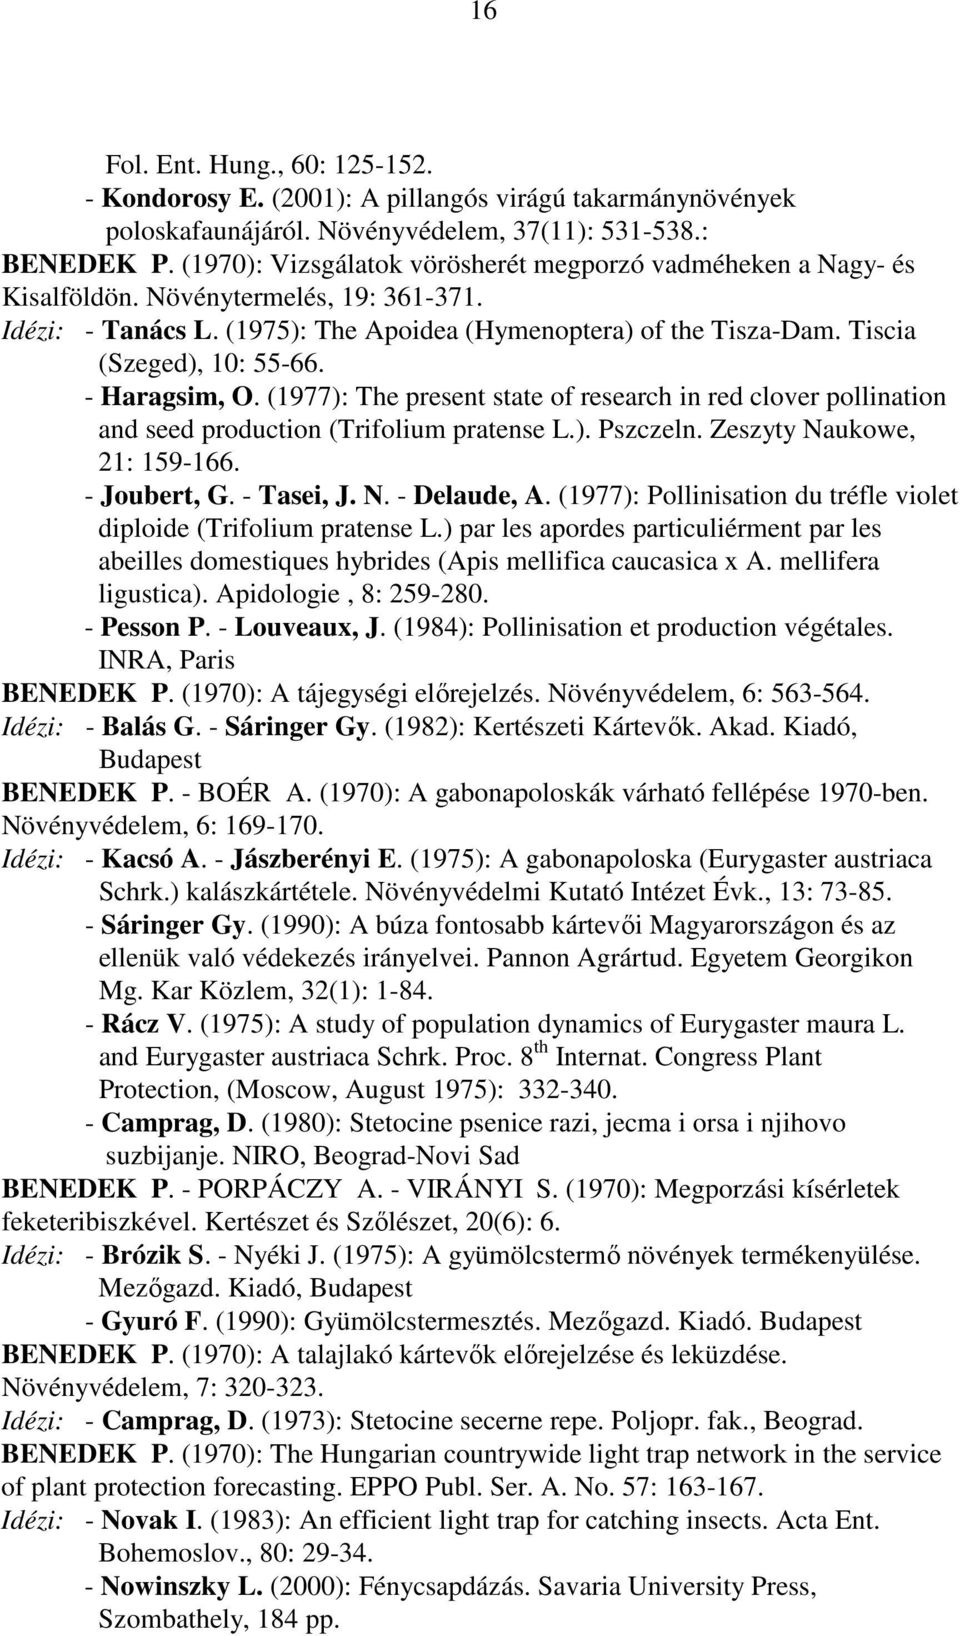 Tiscia (Szeged), 10: 55-66. - Haragsim, O. (1977): The present state of research in red clover pollination and seed production (Trifolium pratense L.). Pszczeln. Zeszyty Naukowe, 21: 159-166.